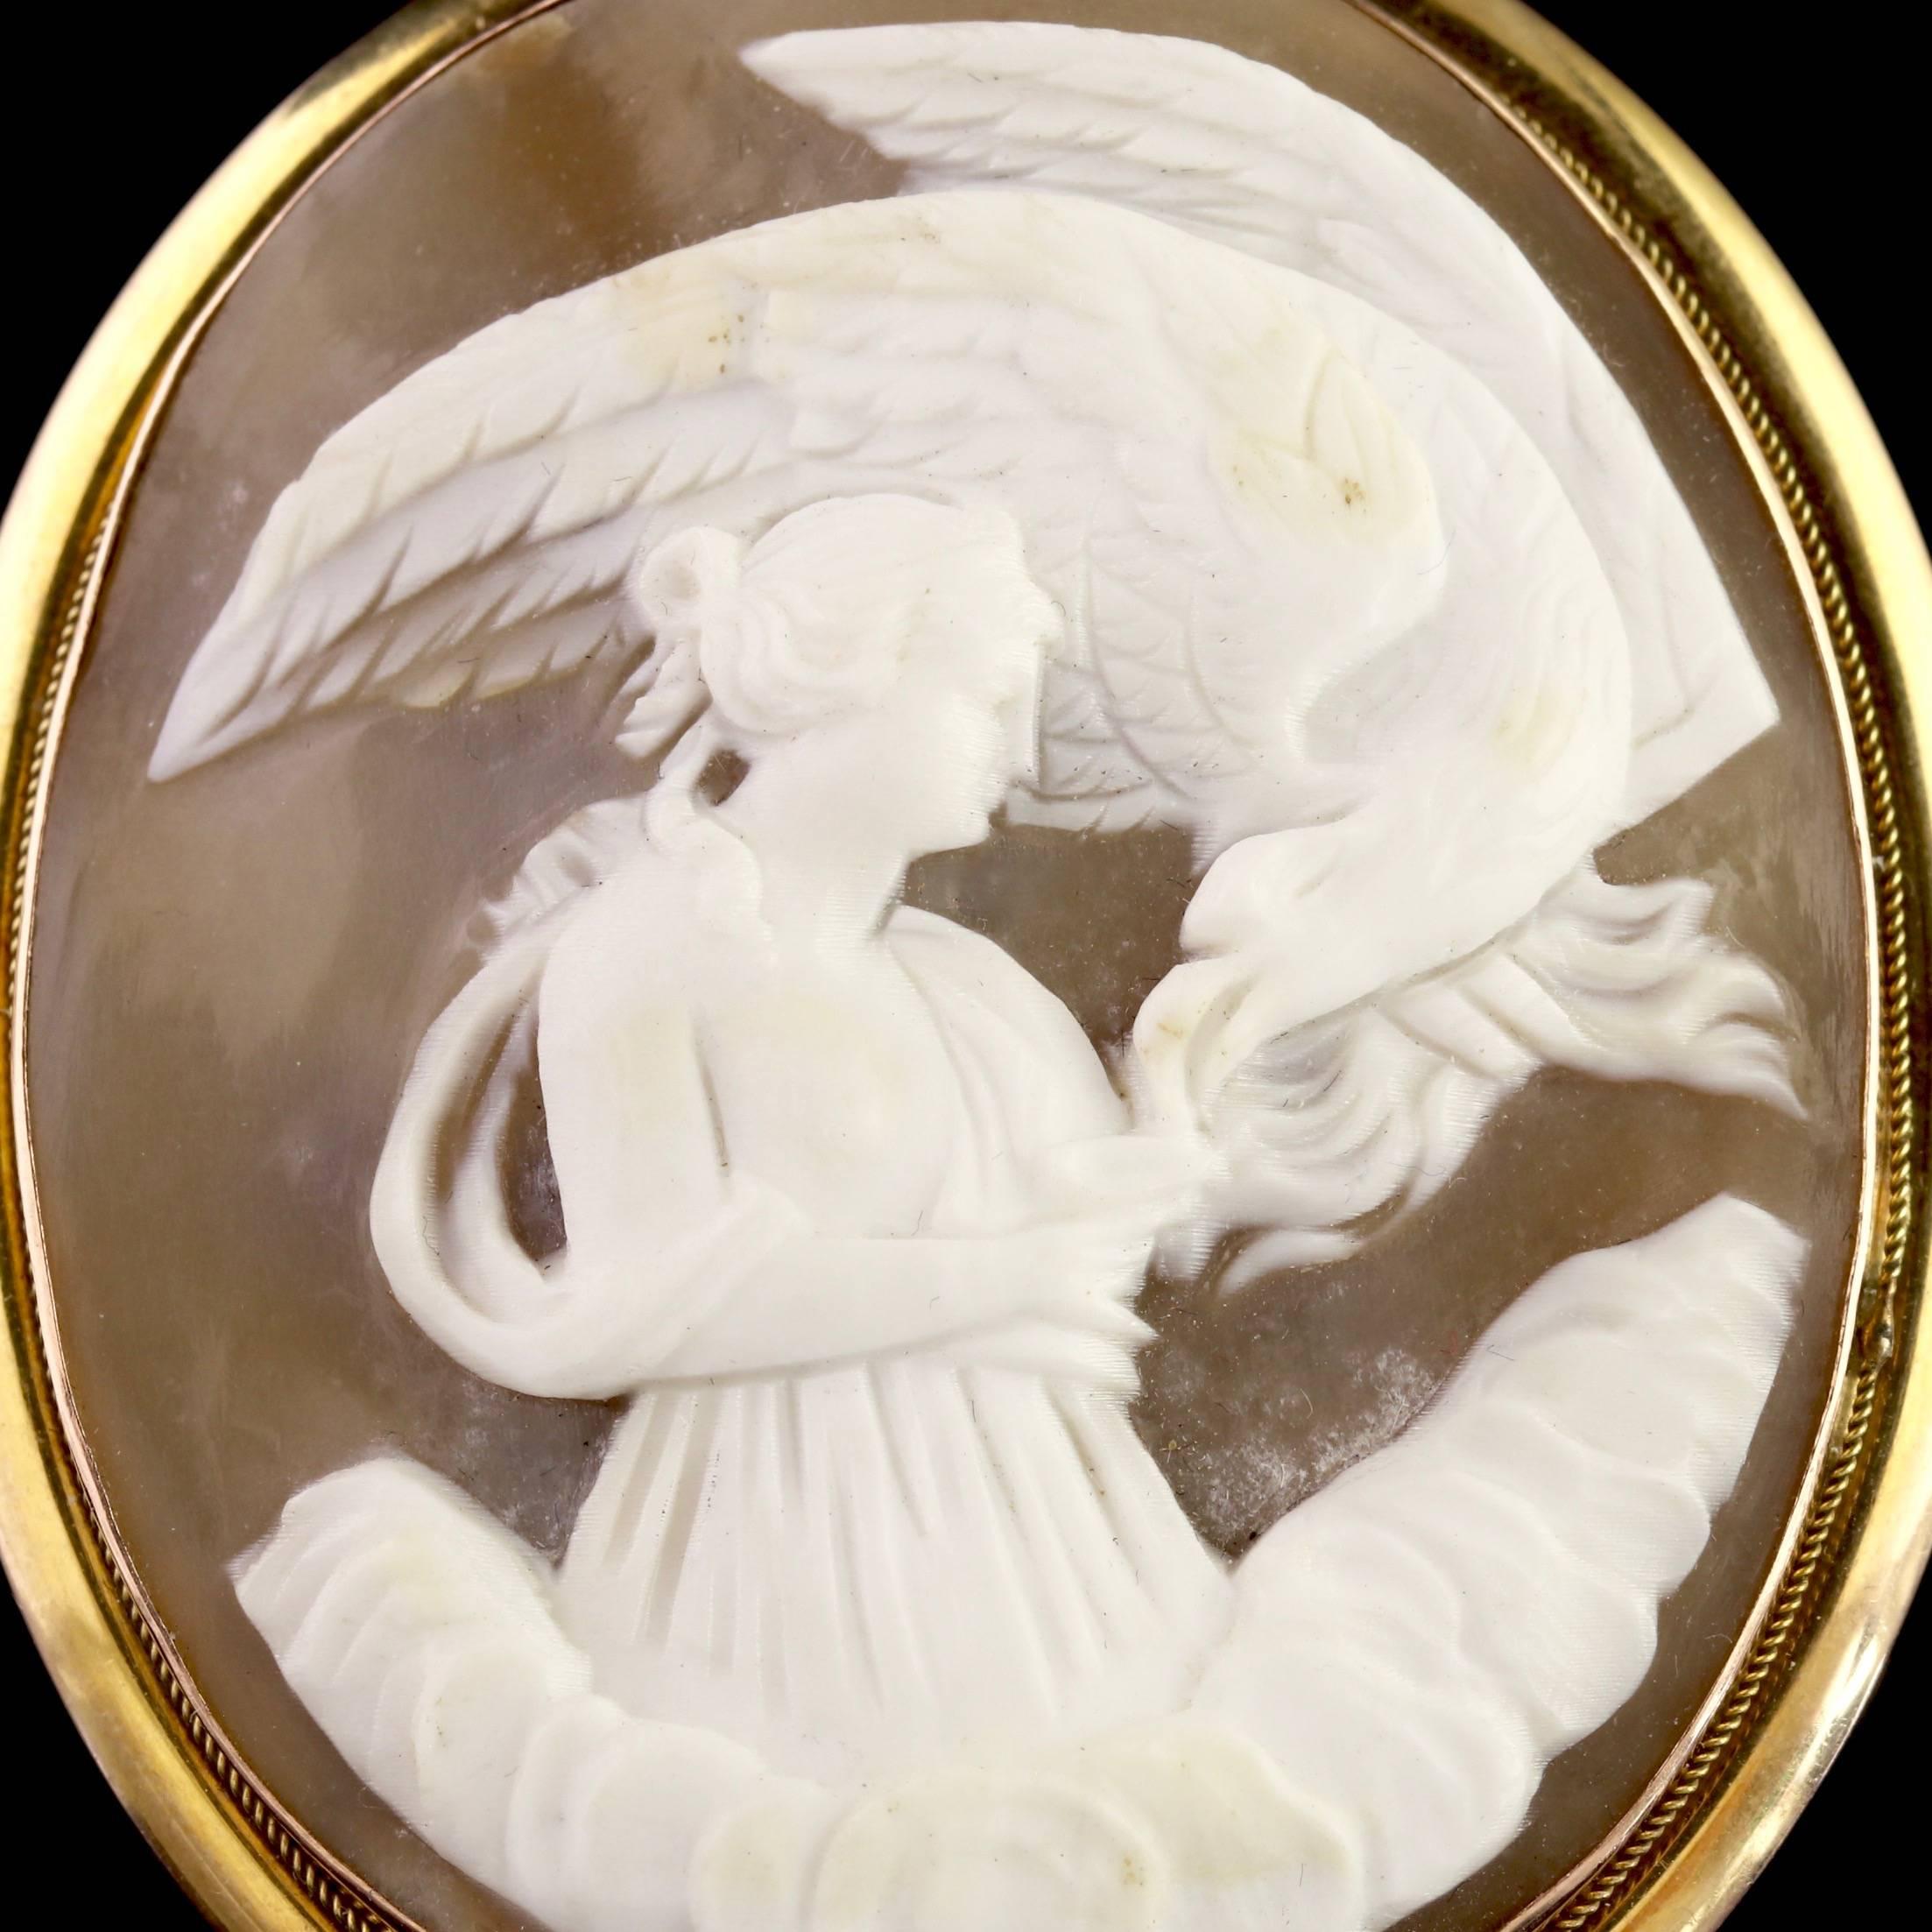 To read more please click continue reading below-

This fabulous antique 9ct Yellow Gold Bull mouth Shell Victorian Cameo pendant is circa 1880.

The detailed carving is from a Bull Mouth Shell Cameo which is very well executed portraying a lovely